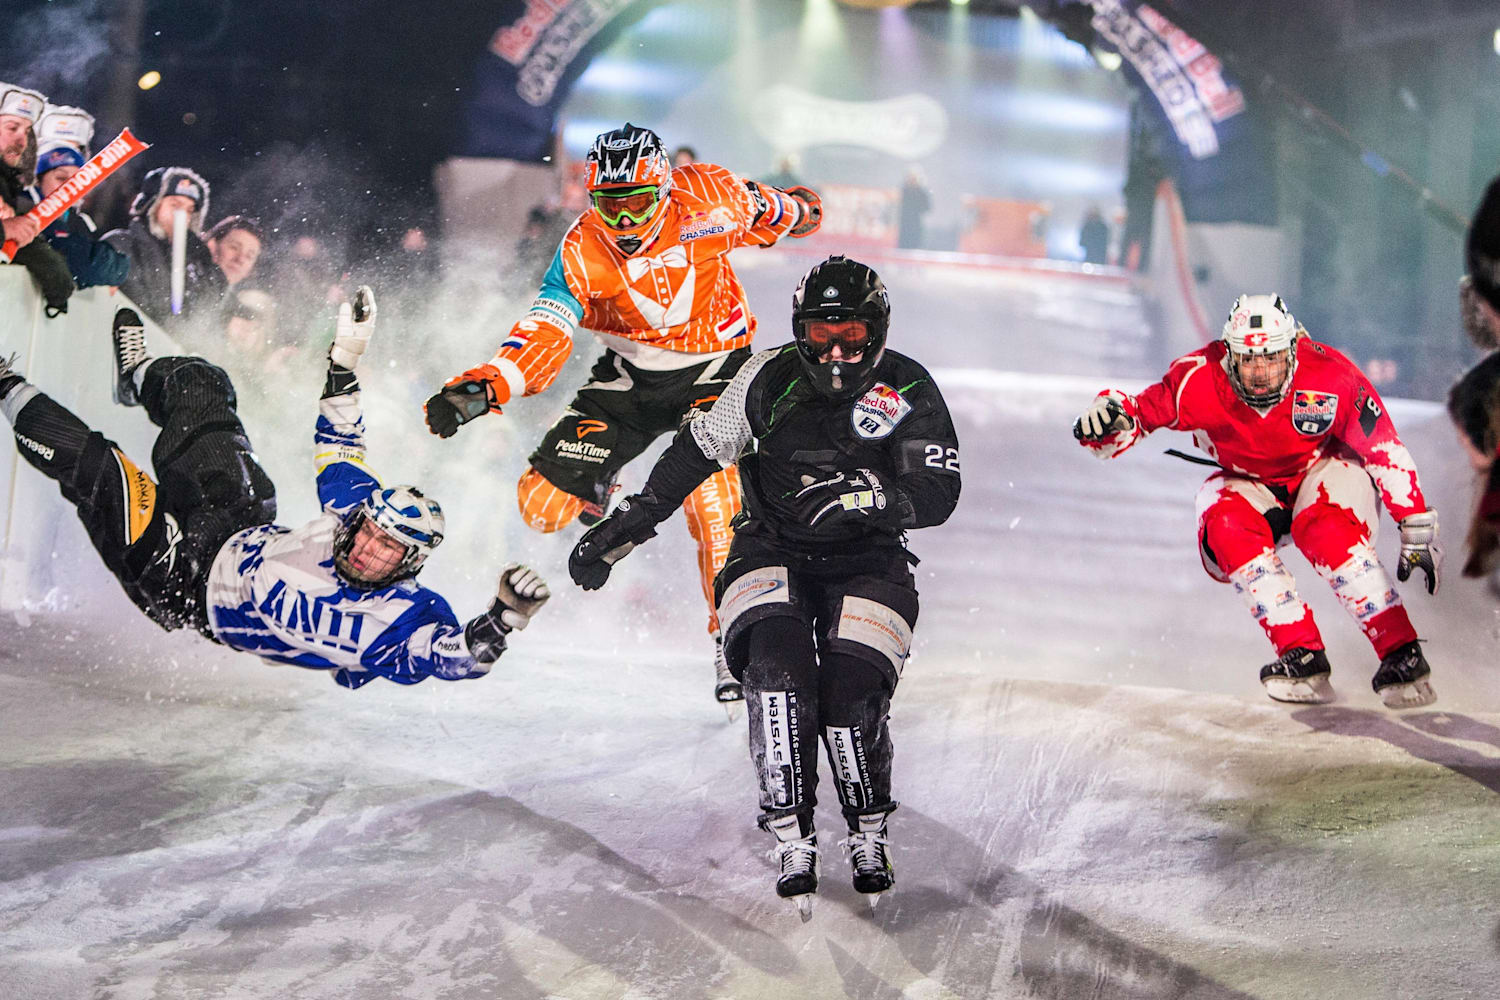 Discover the Red Bull Ice Cross World Championships